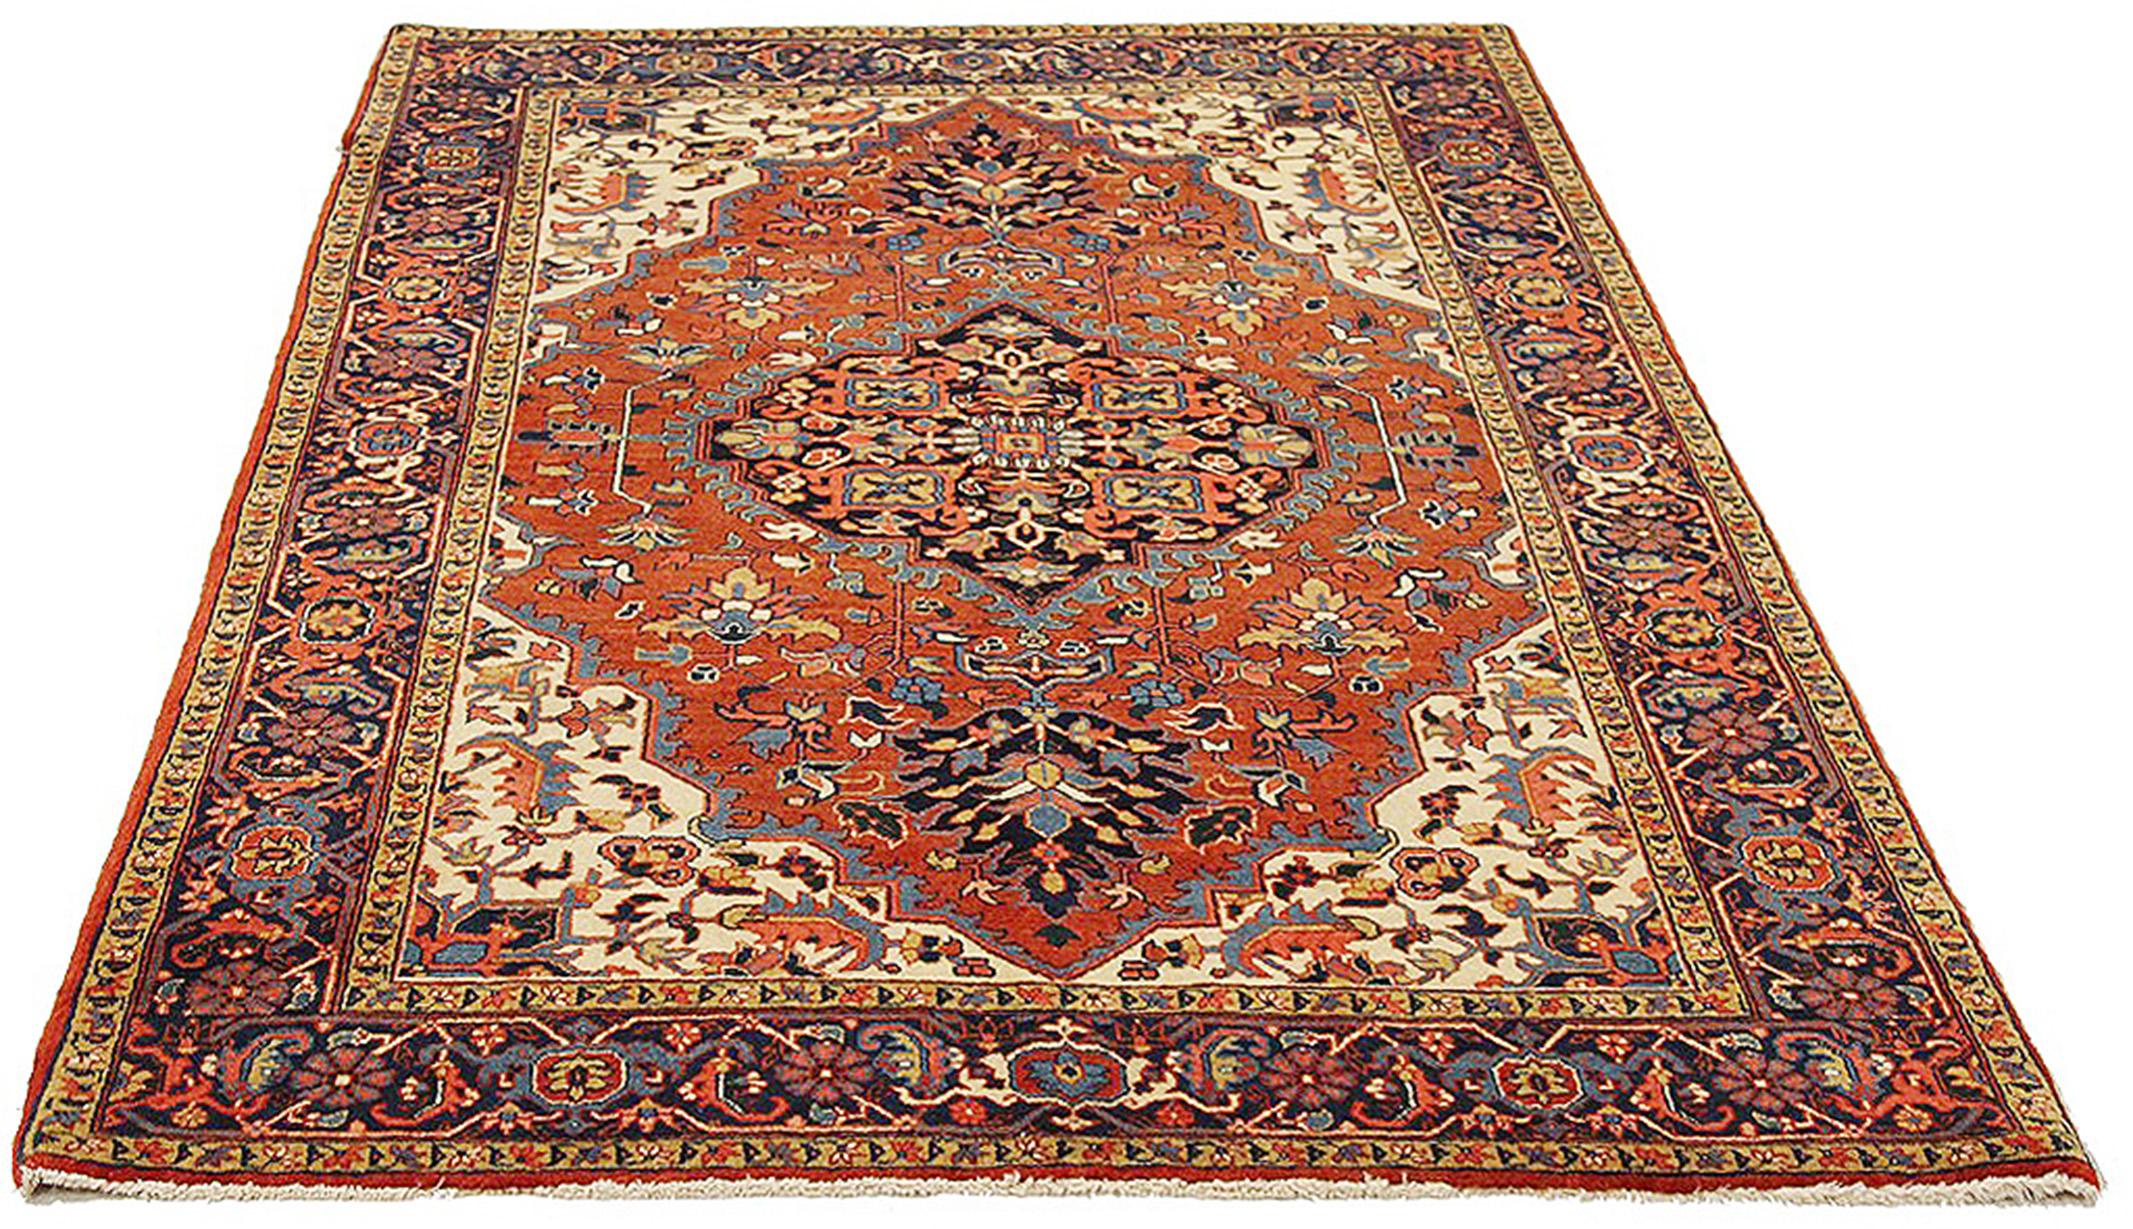 Antique Persian rug handwoven from the finest sheep’s wool and colored with all-natural vegetable dyes that are safe for humans and pets. It’s a traditional Heriz design featuring a lovely red and ivory field with blue and beige floral patterns.